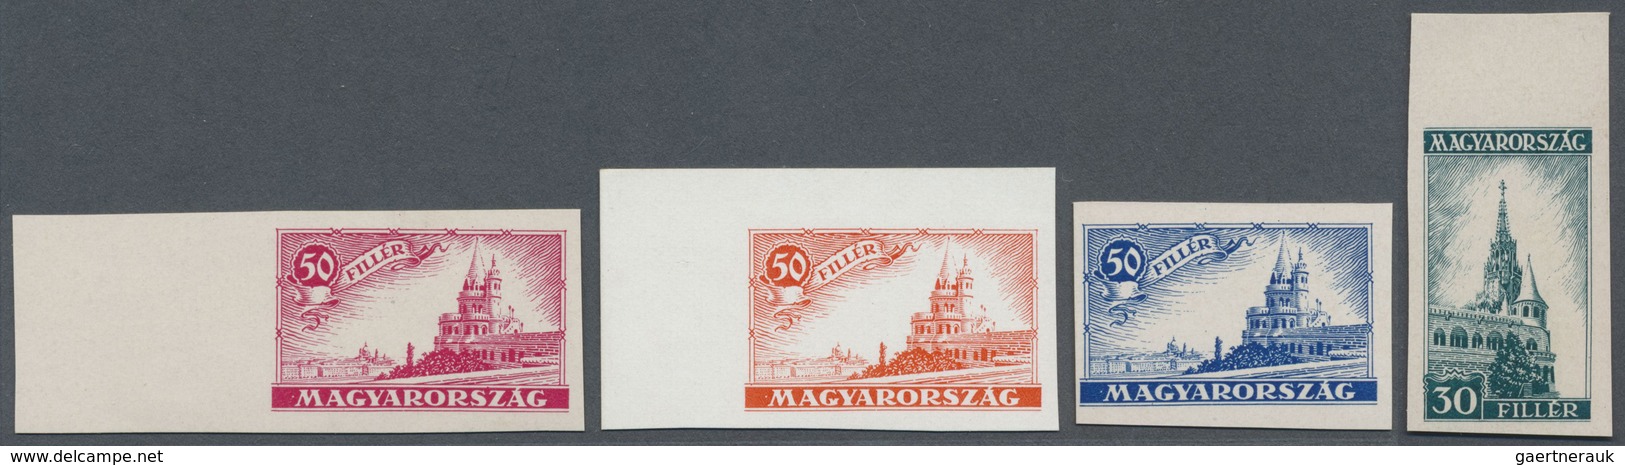 (*) Ungarn: 1926: "30 FILLER MAGYARORSZAG" Or "50 FILLER" Showing The Matthias Cathedral ECKERLIN ESSAYS - Lettres & Documents